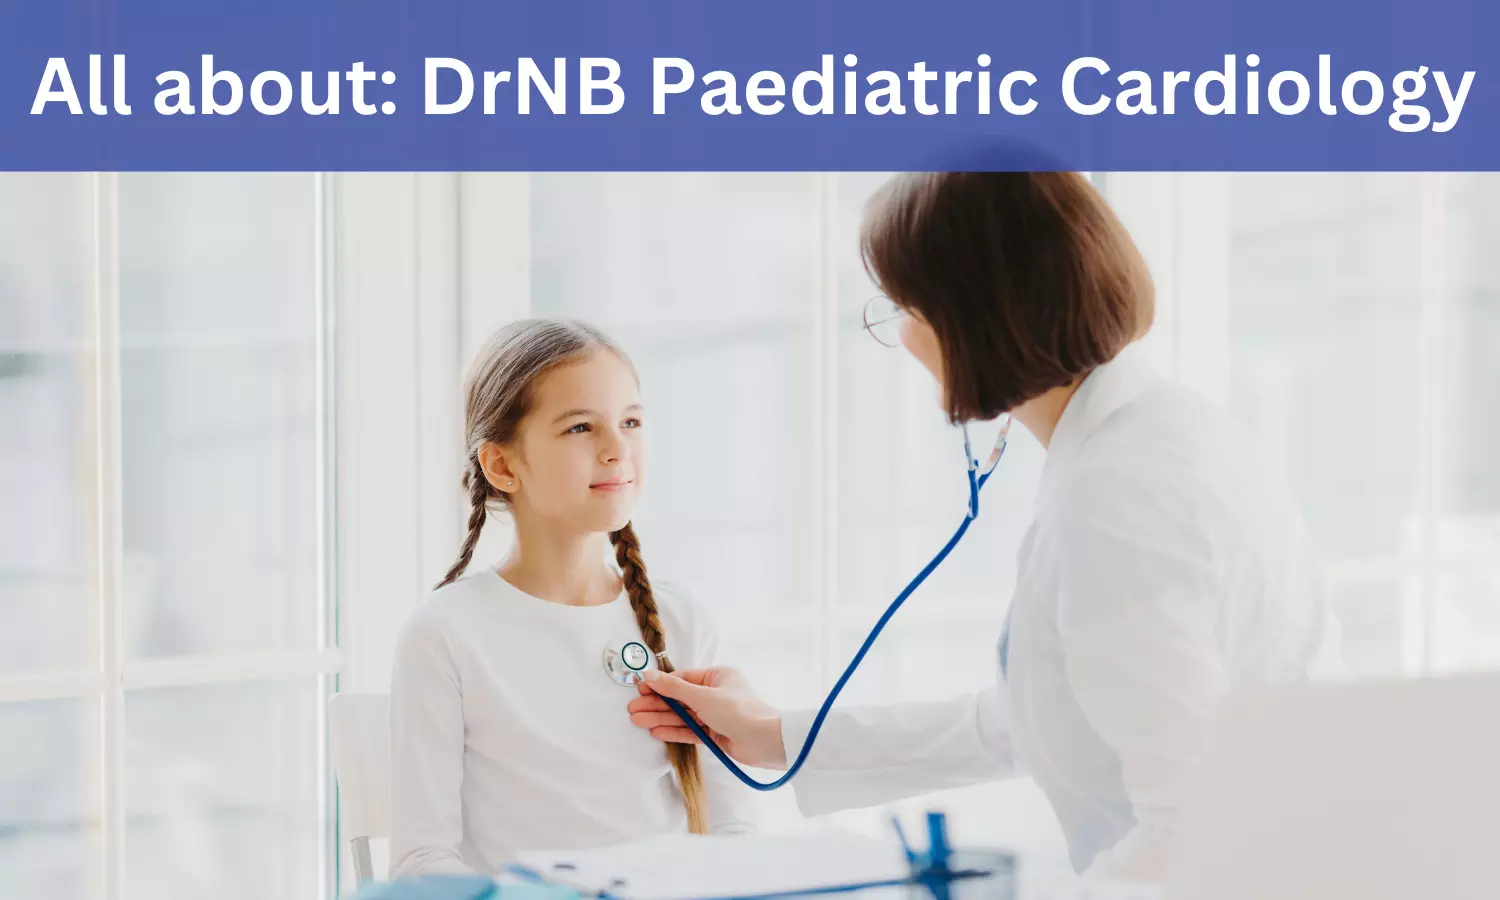 DrNB Paediatric Cardiology: Admissions, Medical Colleges, Fees, Eligibility Criteria here